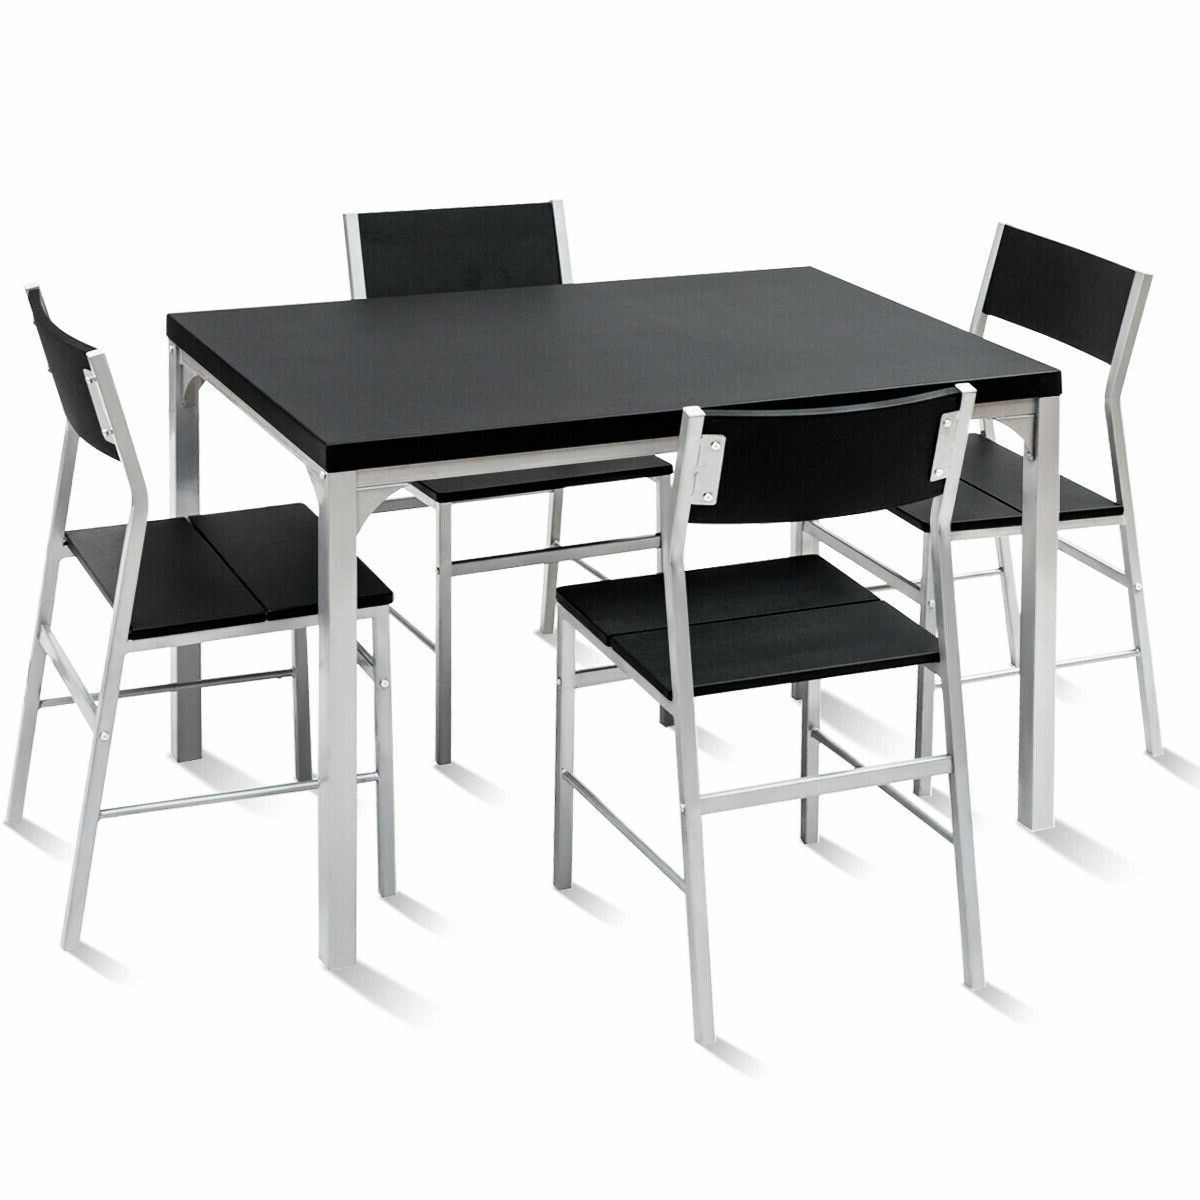 Catalina 5 Piece Dining Set Within Most Up To Date Linette 5 Piece Dining Table Sets (View 6 of 20)